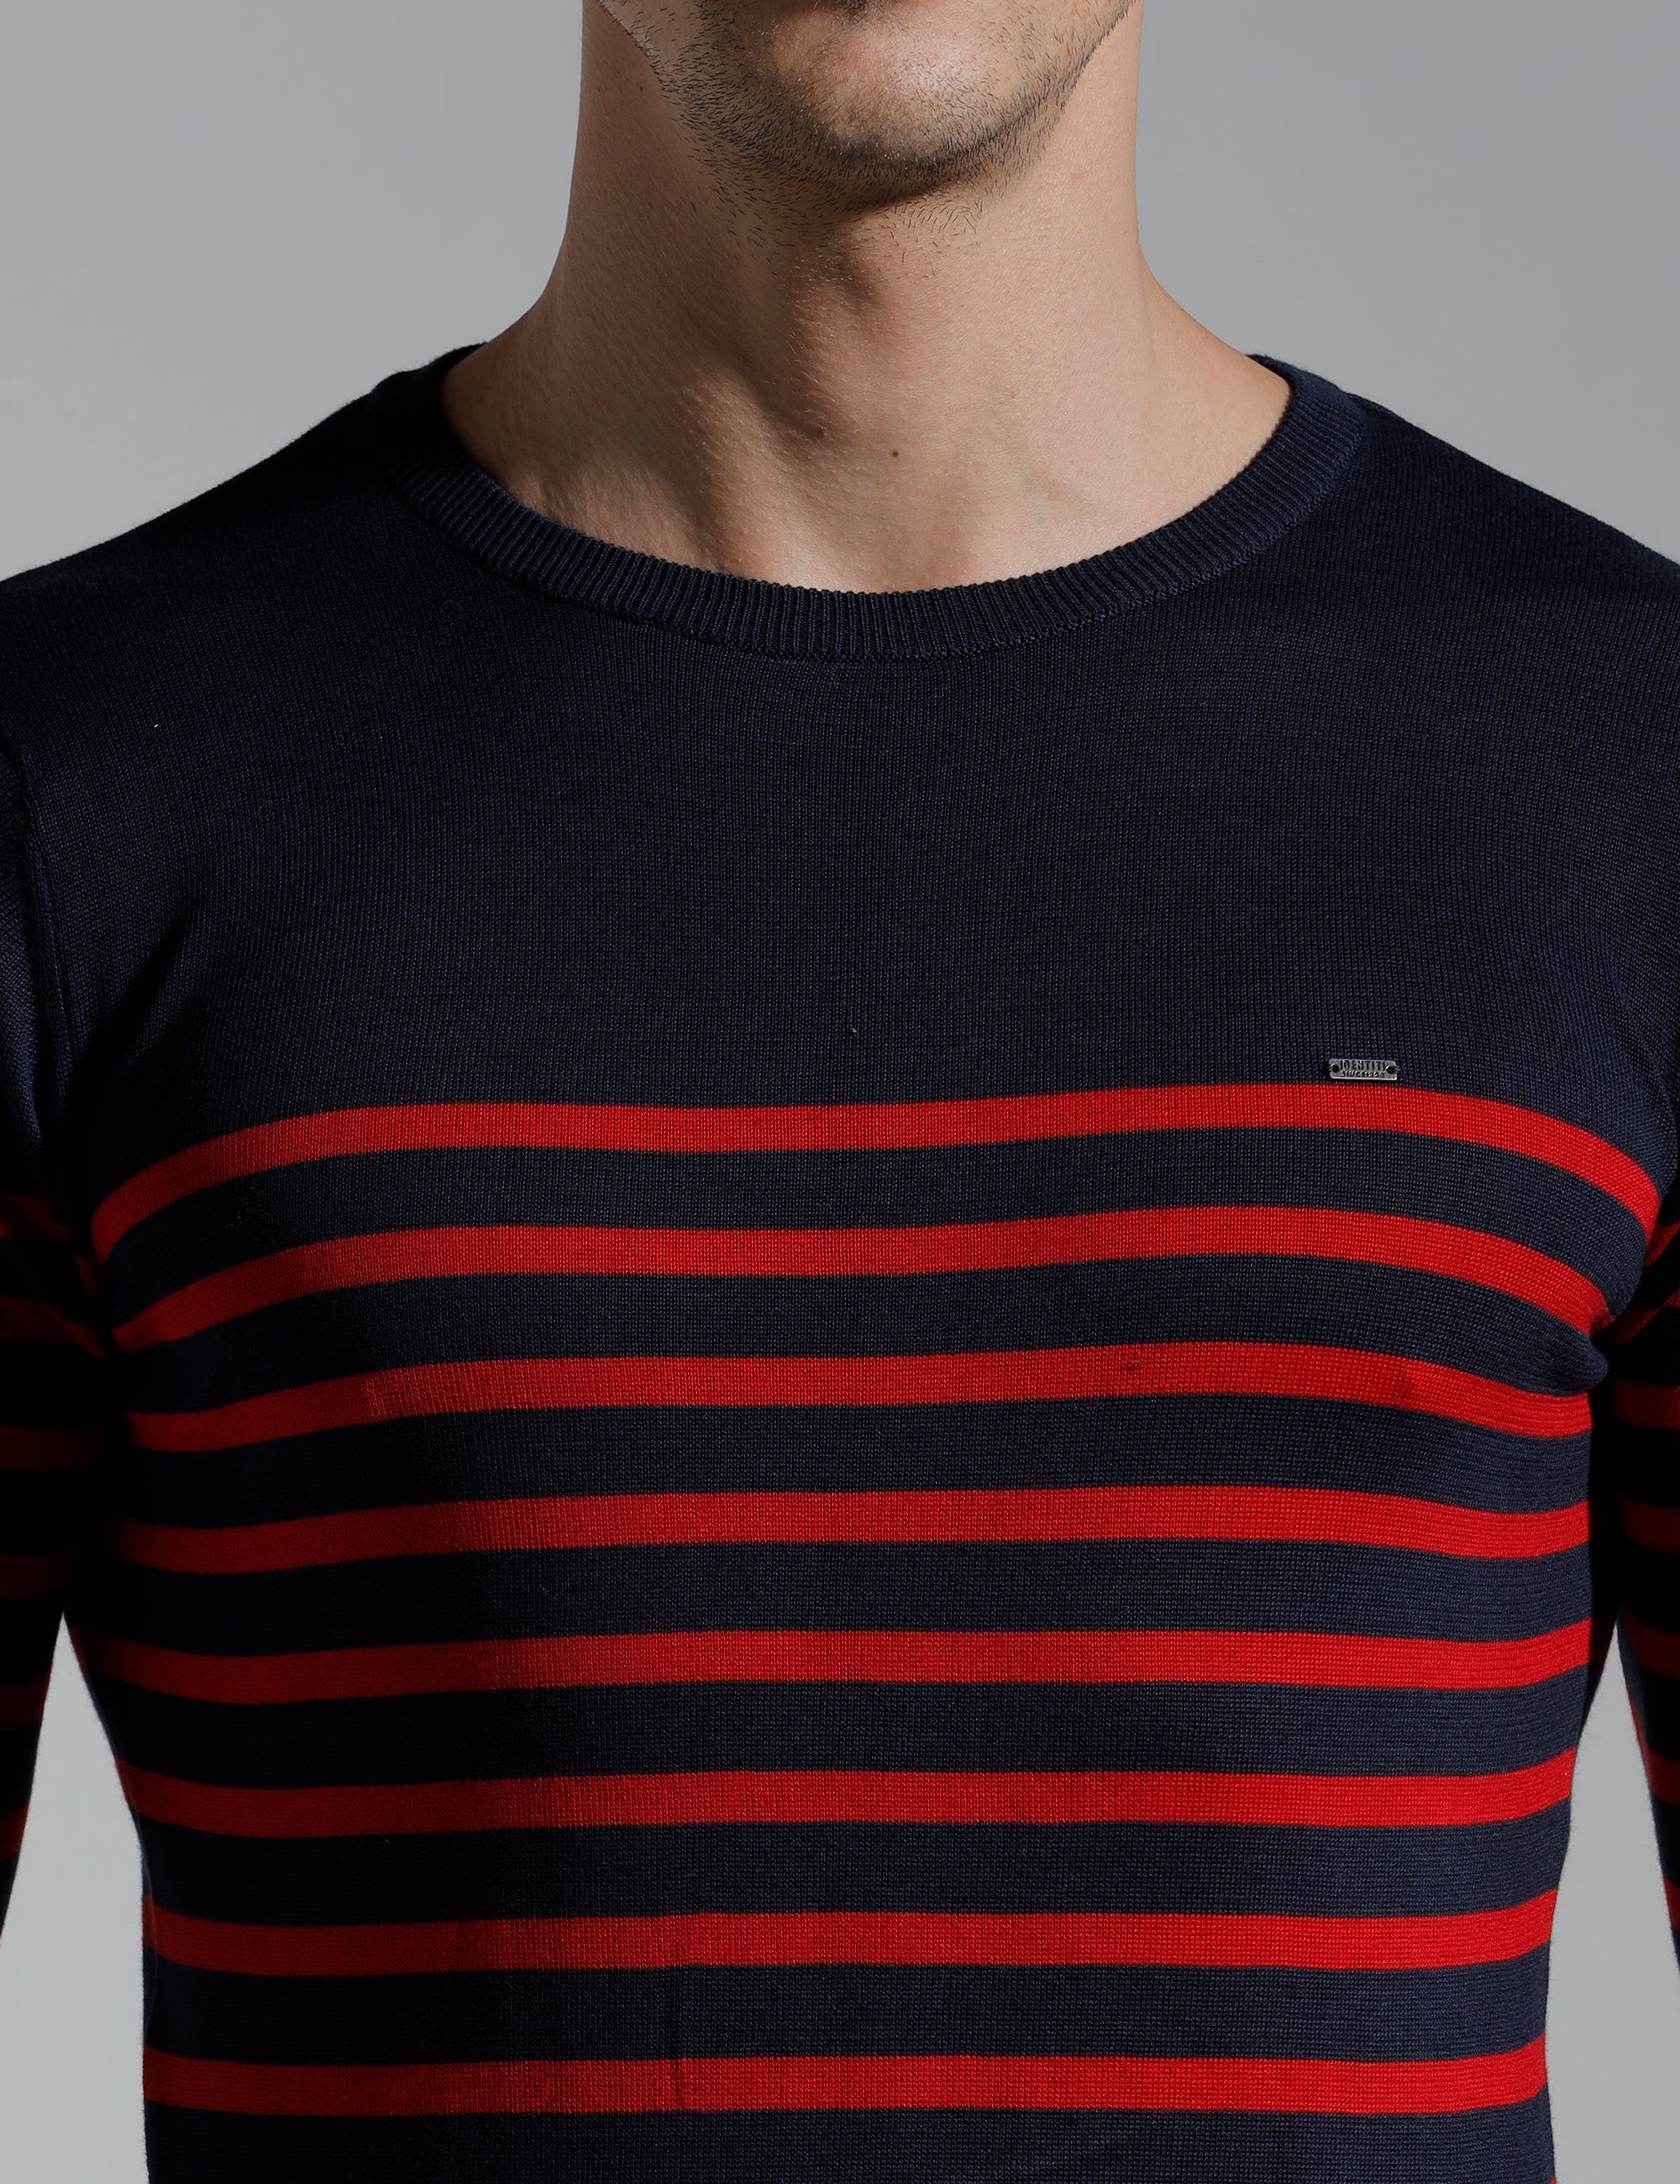 Identiti Full Sleeve Striped Slim Fit Cotton Casual Pull Over T-shirt For Men